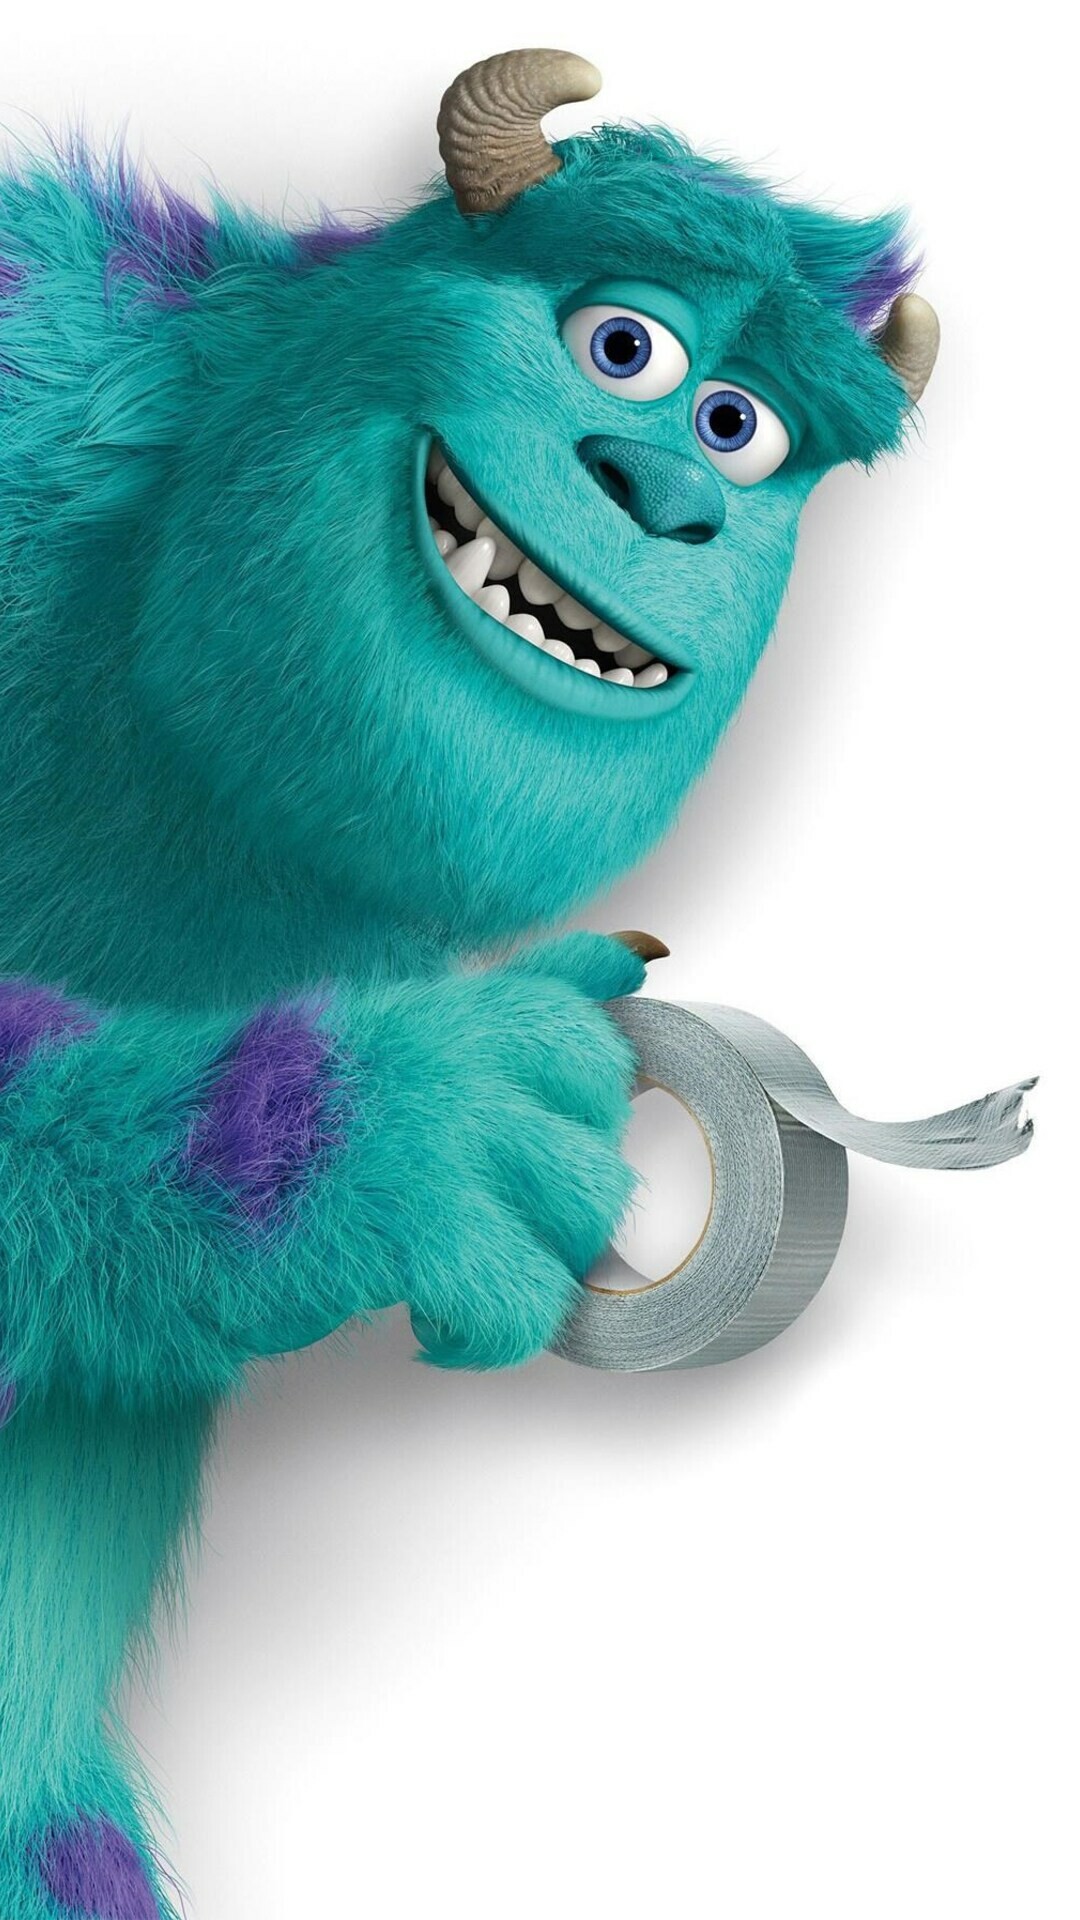 Monsters, Inc.: James P. Sullivan, One of the main characters of a 2001 American computer-animated monster comedy film. 1080x1920 Full HD Wallpaper.